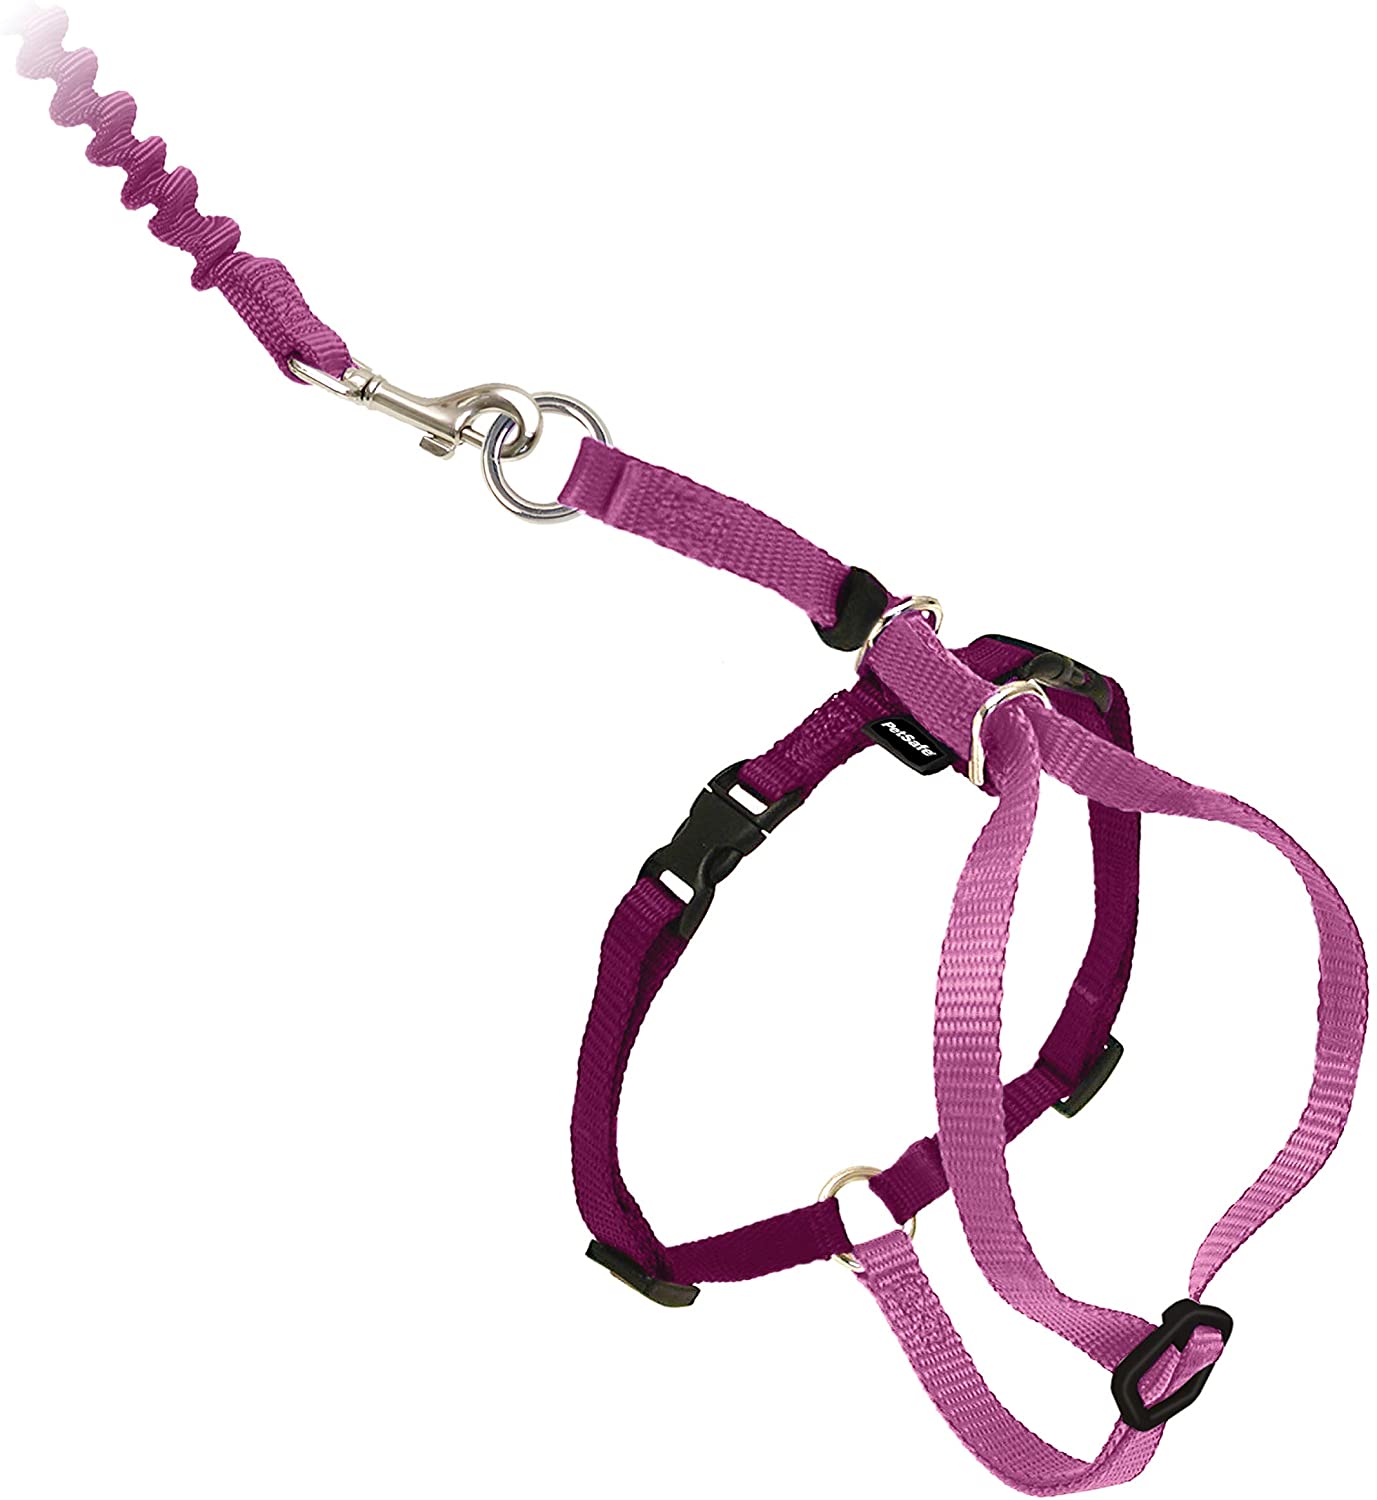 PetSafe Come With Me Kitty Harness and Bungee Leash, Large, Dusty Rose. (Black). - e4cents